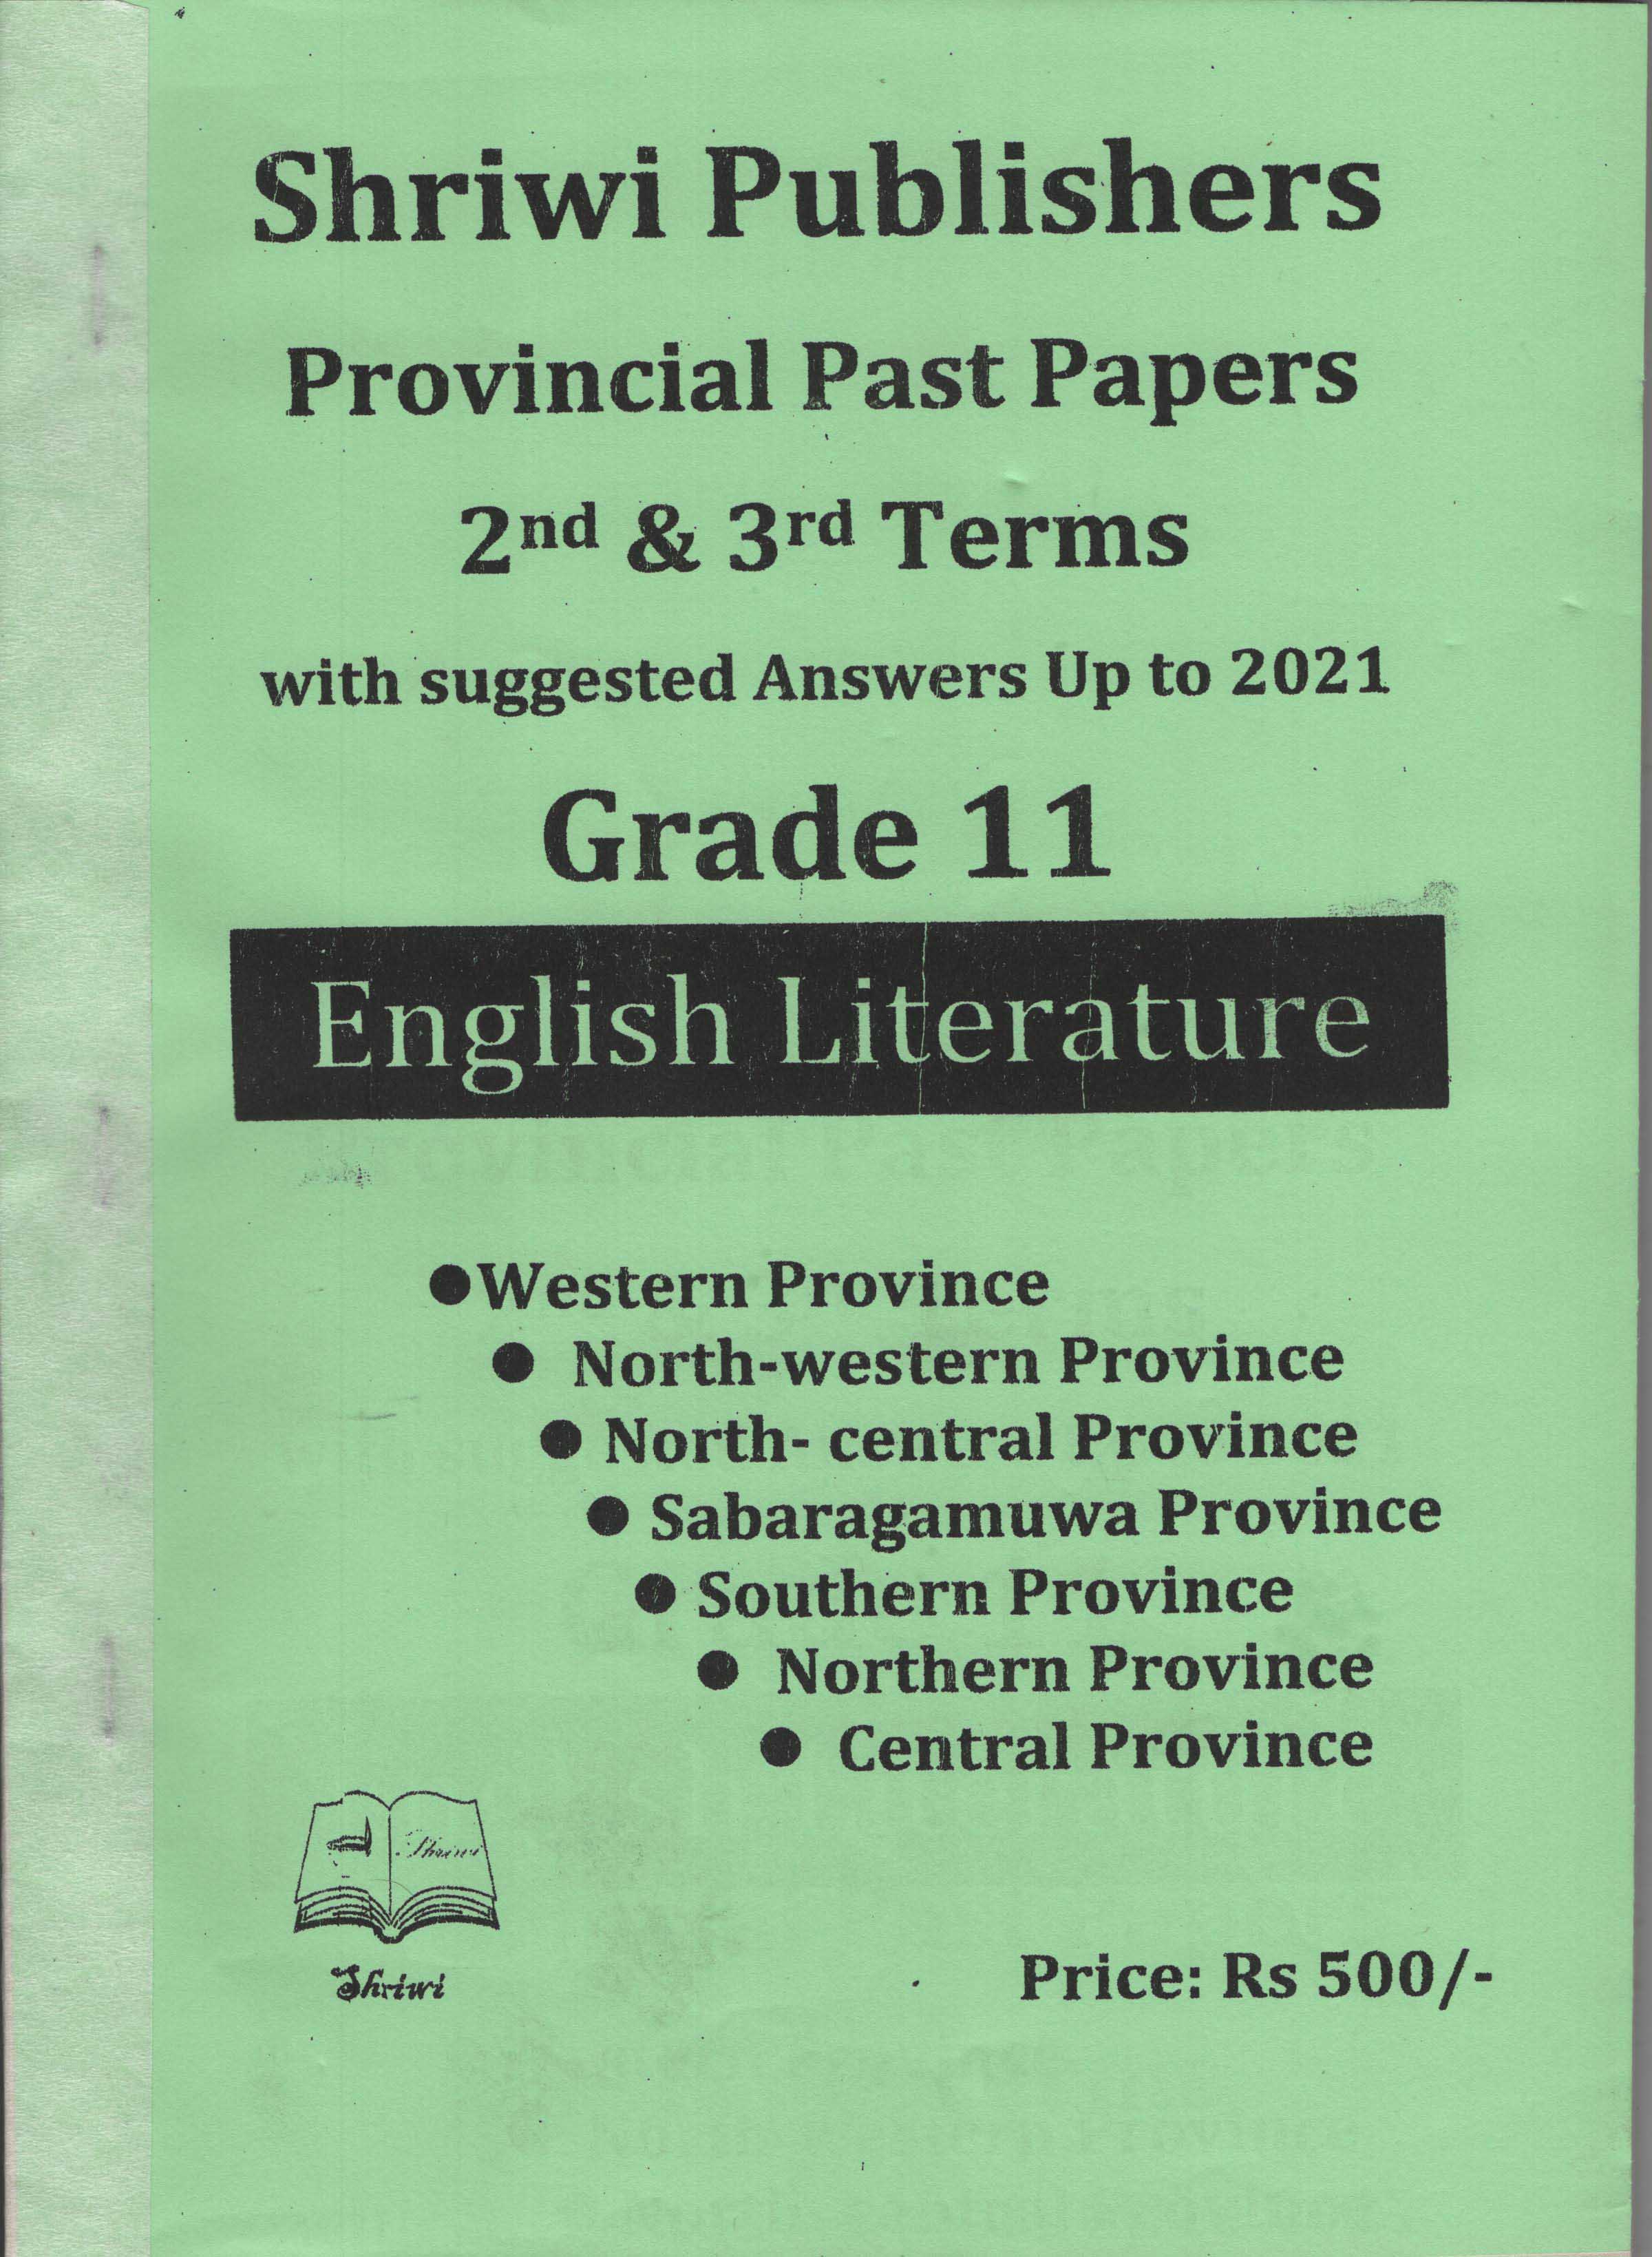 Shriwi Grade 11 English Literature Provincial Past Papers 2nd & 3rd Terms  with Suggested Answers up to 2021